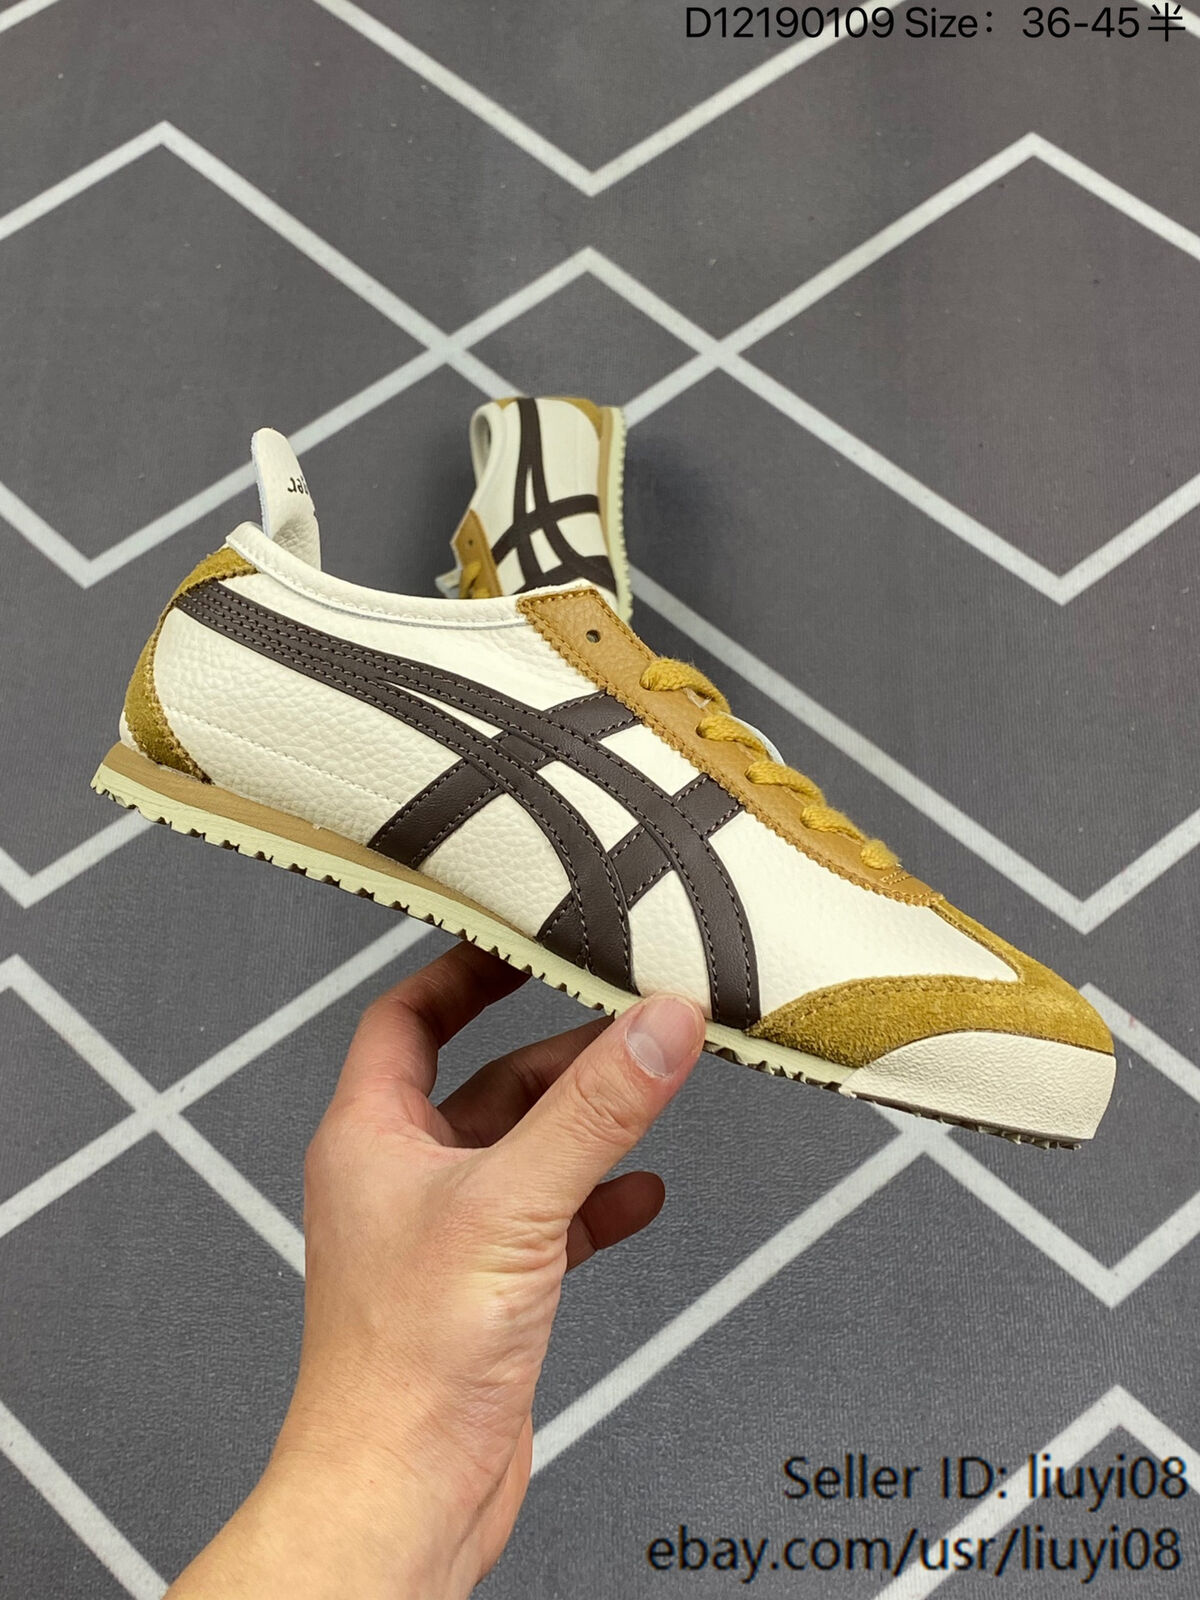 [NEW] Onitsuka Tiger MEXICO 66 Classic Beige/Yellow Unisex Shoes US Size: 4-10